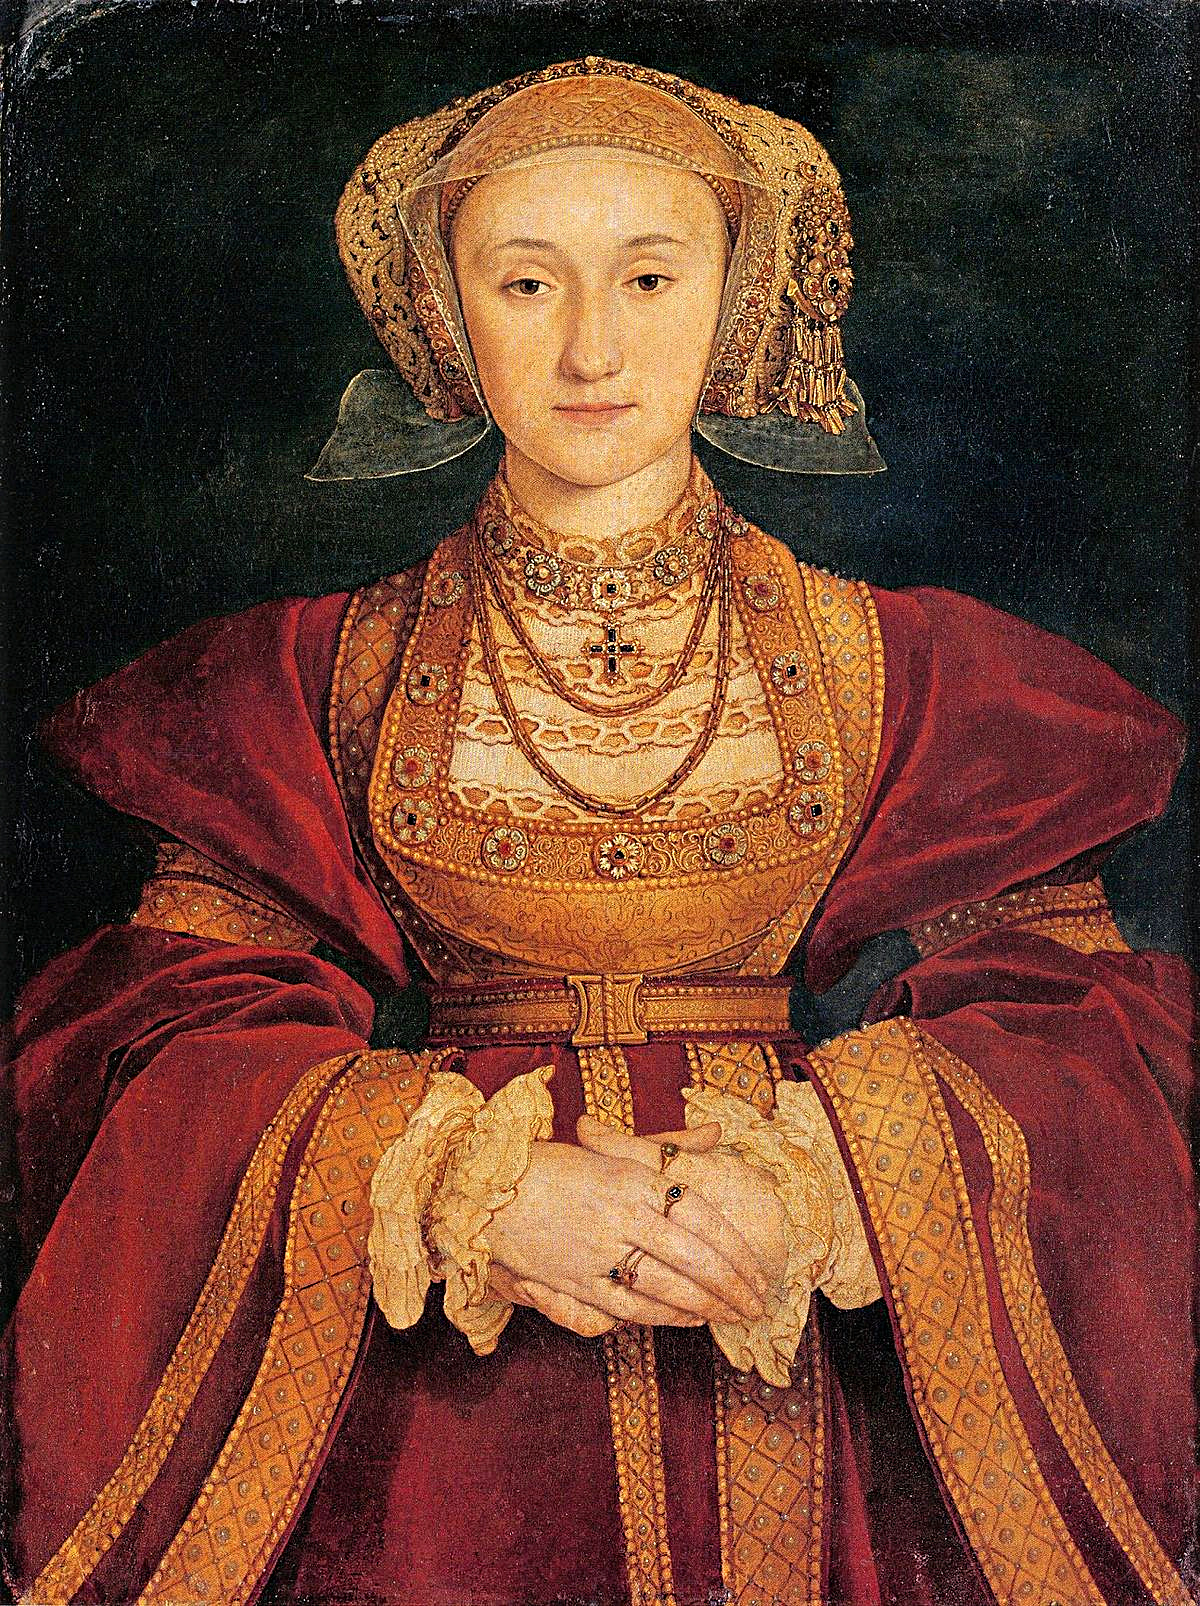 Anne of Cleves was born at the City Palace of Dusseldorf 